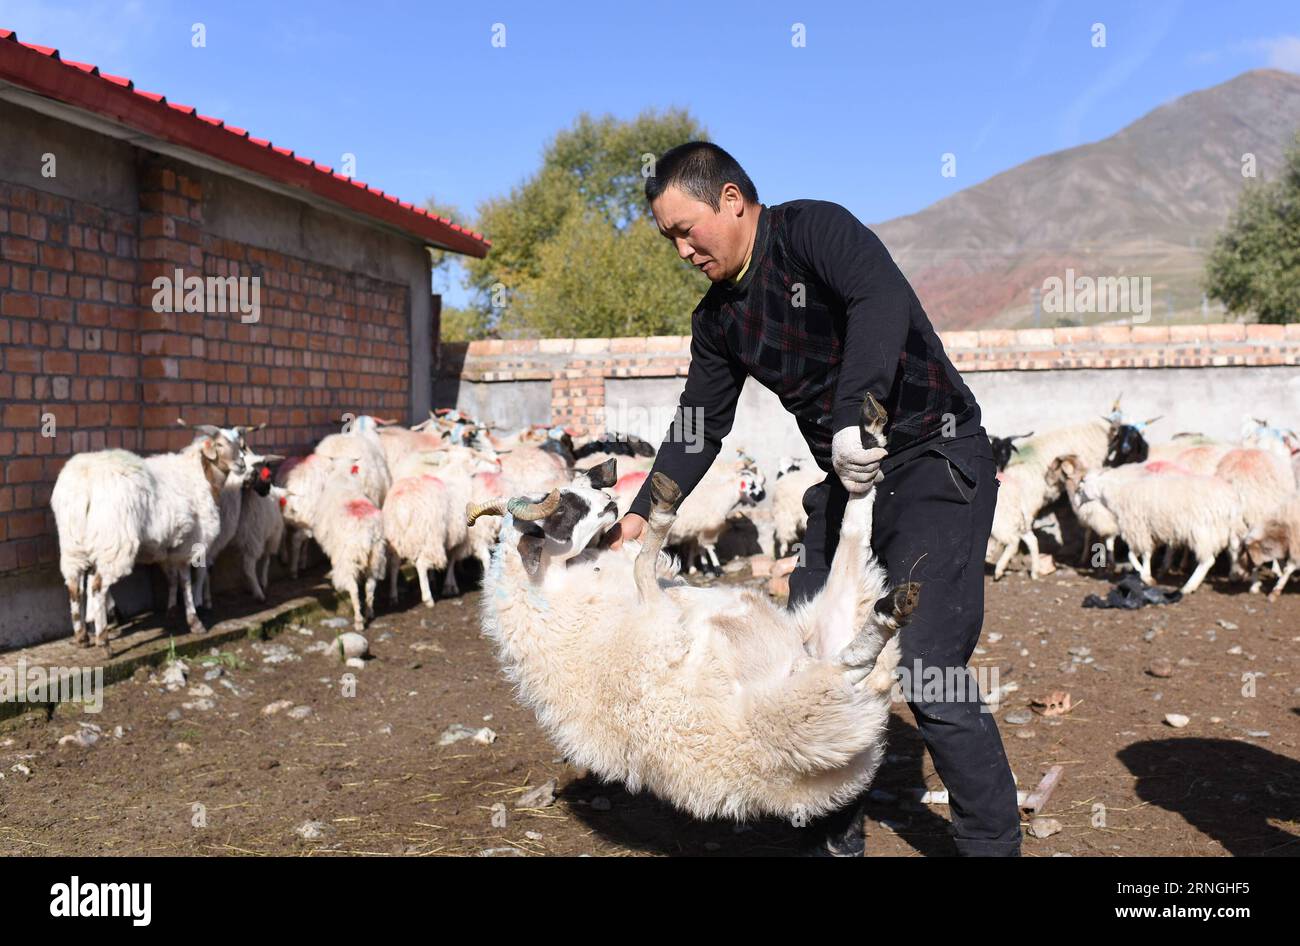 (160930) -- QILIAN, Sept. 30, 2016 -- Zhao Fugui, son of Zhao Xuewen, prepares to feed medicine to a sheep for parasite control at a livestock-breeding cooperative in Gezidong Village of Zhamashi Township, Qilian County, northwest China s Qinghai Province, Sept. 28, 2016. Our life will get better and better , the 50-year-old Zhao Xuewen said while looking at his sheep on the hillside in Gezidong. His situation was not so good only a few years ago. In 2012, Zhao suffered a fracture to his leg as he repaired his house. Unfortunately, his wife had three operations in the same year. The successive Stock Photo